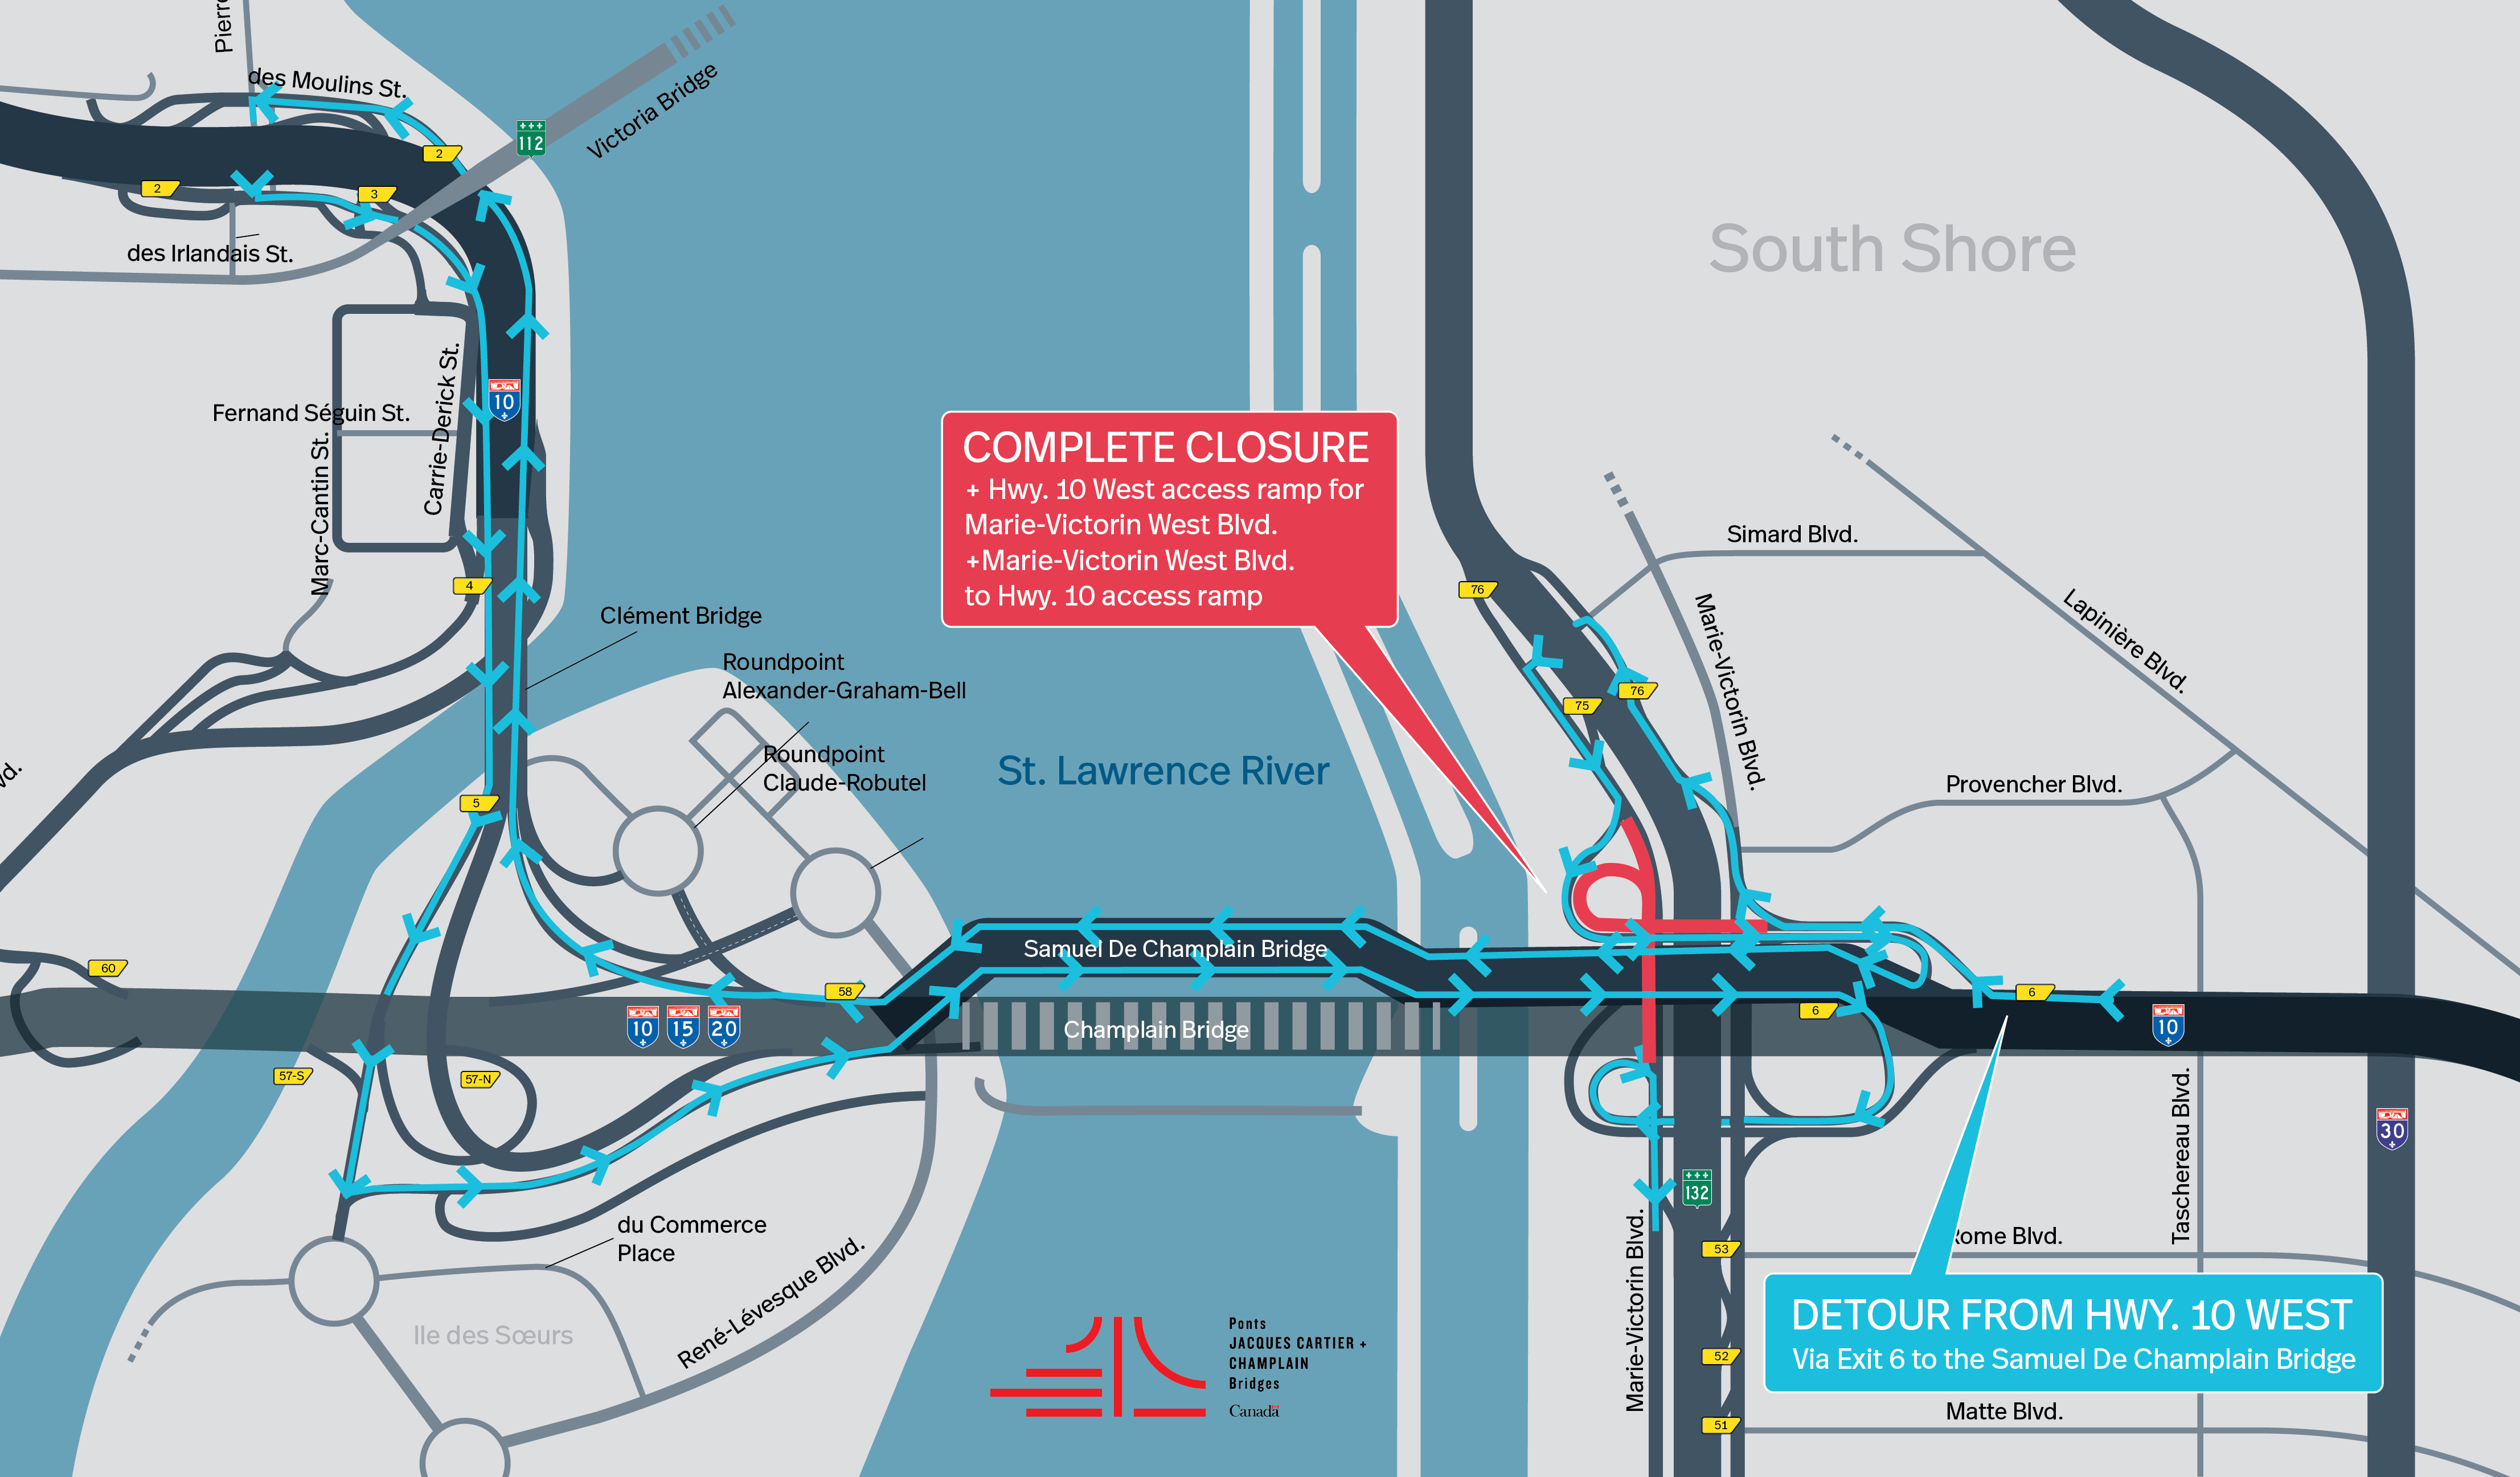 Brossard Sector | Complete closure of Blvd. Marie-Victorin West and from the Hwy. 10 West access ramp toward Blvd. Marie-Victorin West, on July 4